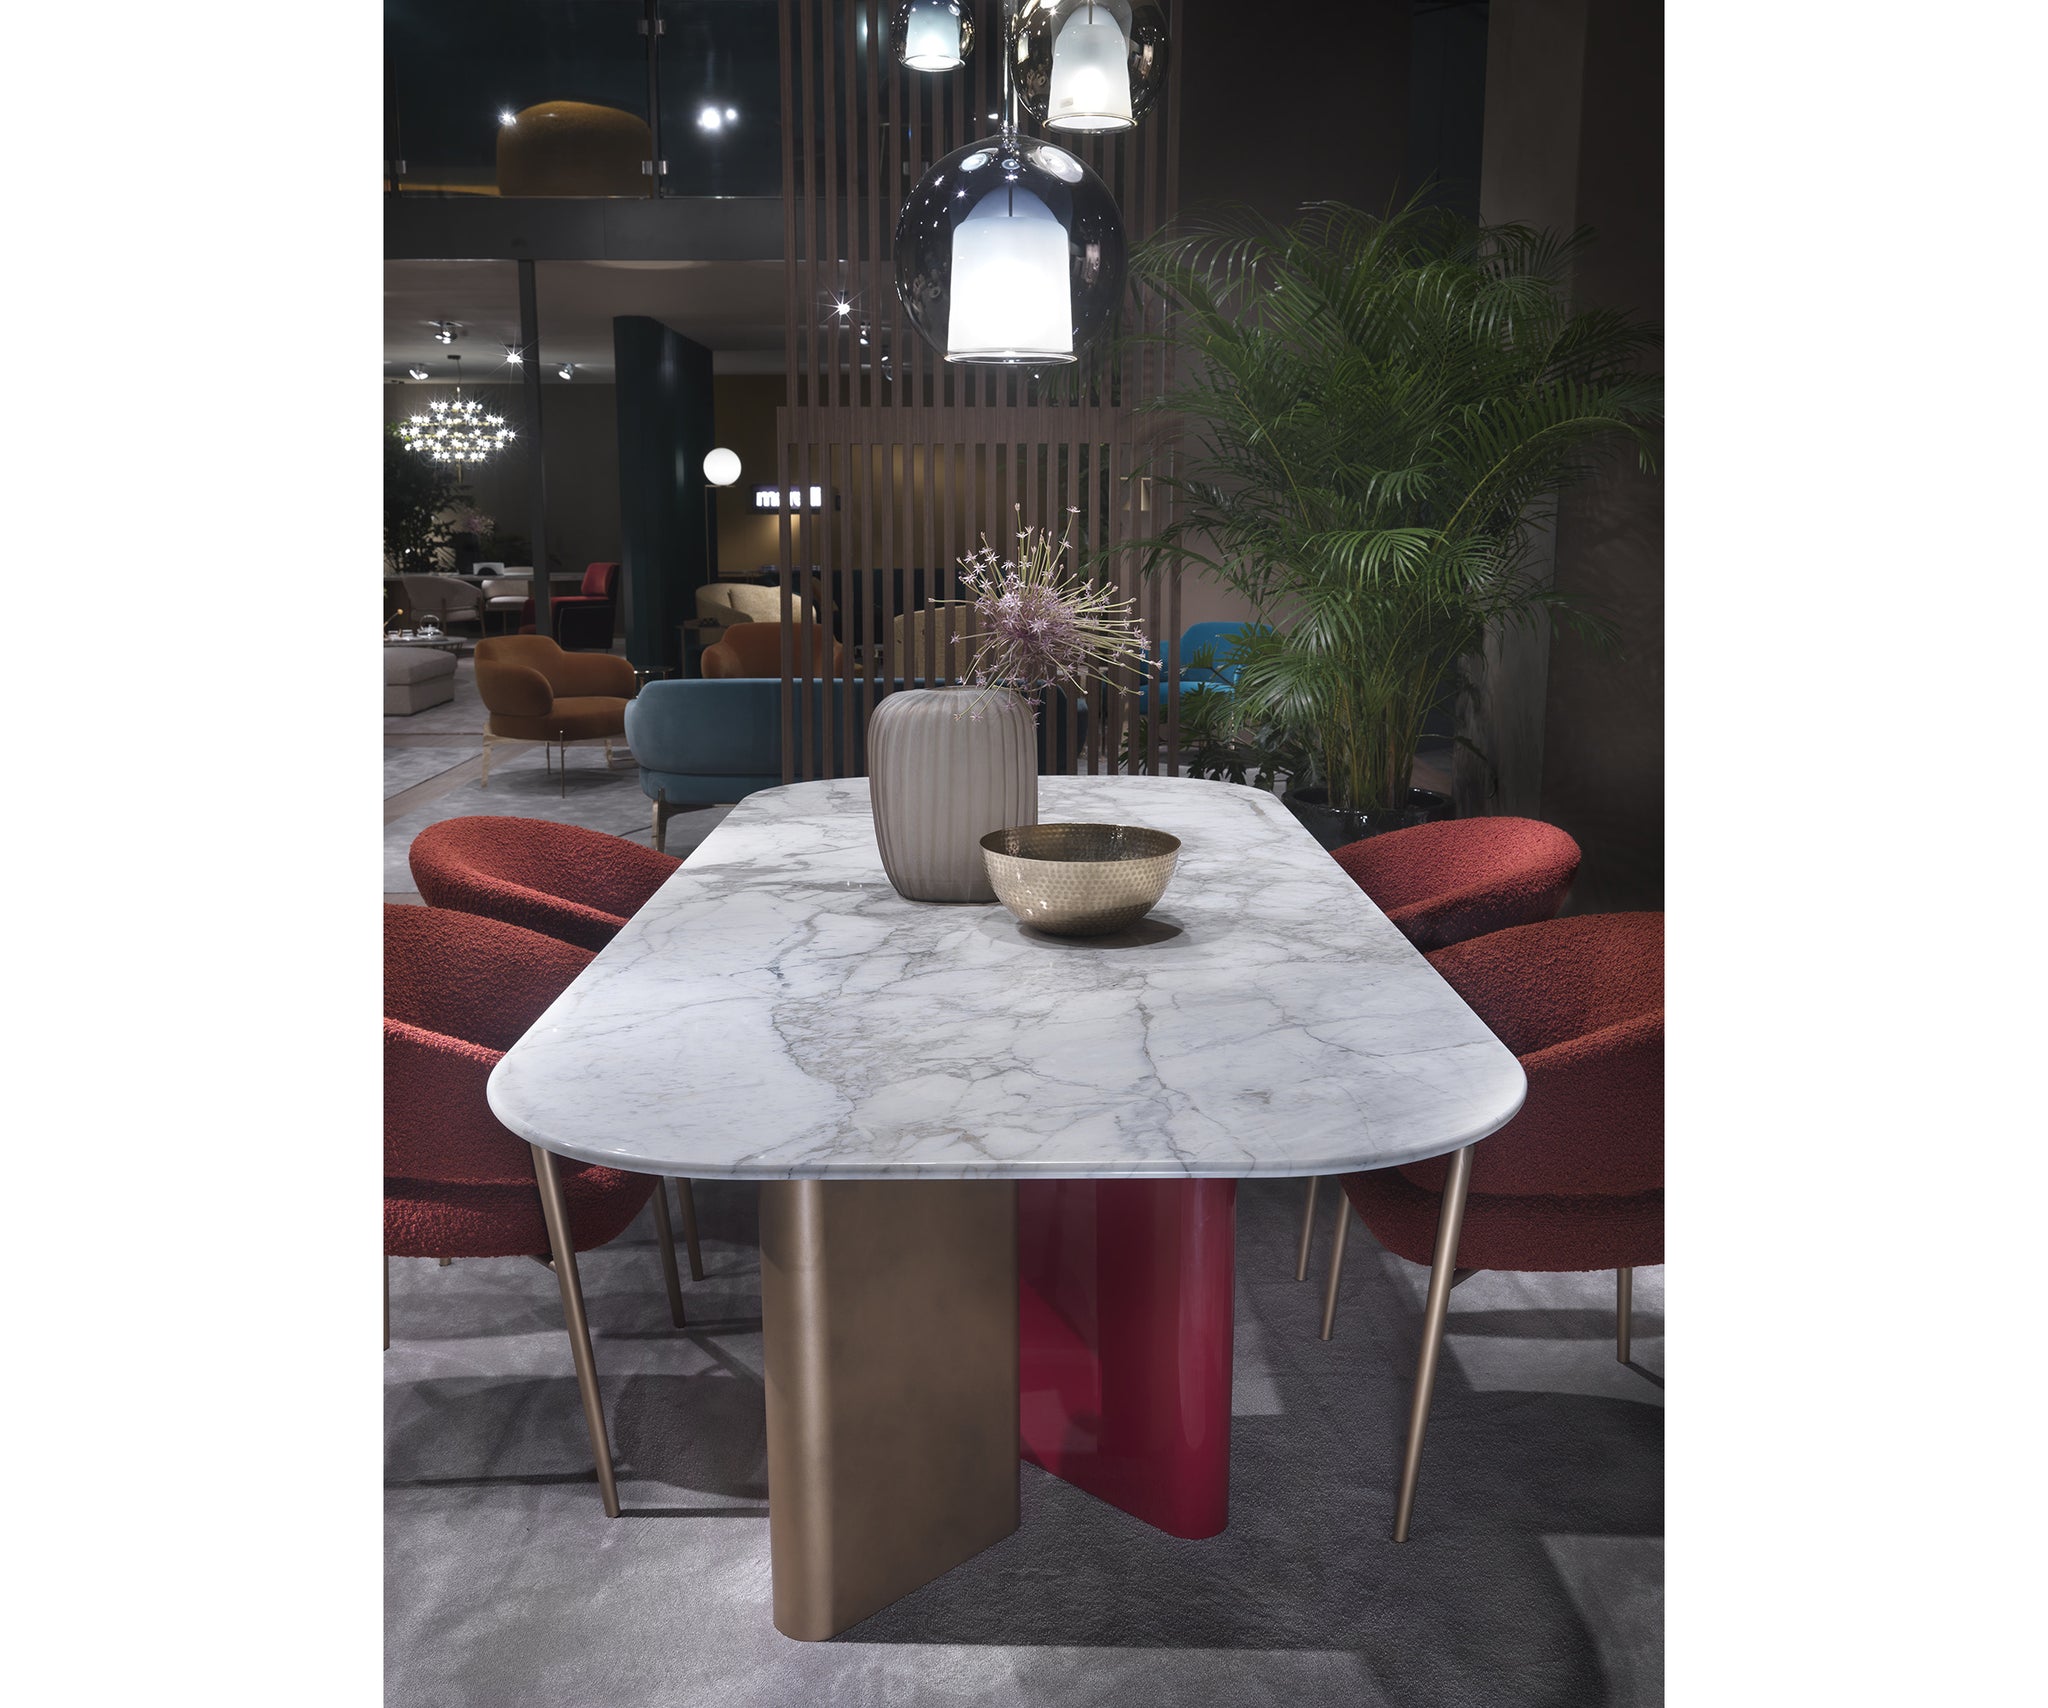 ONNO Round Table by Marelli by Devran3D